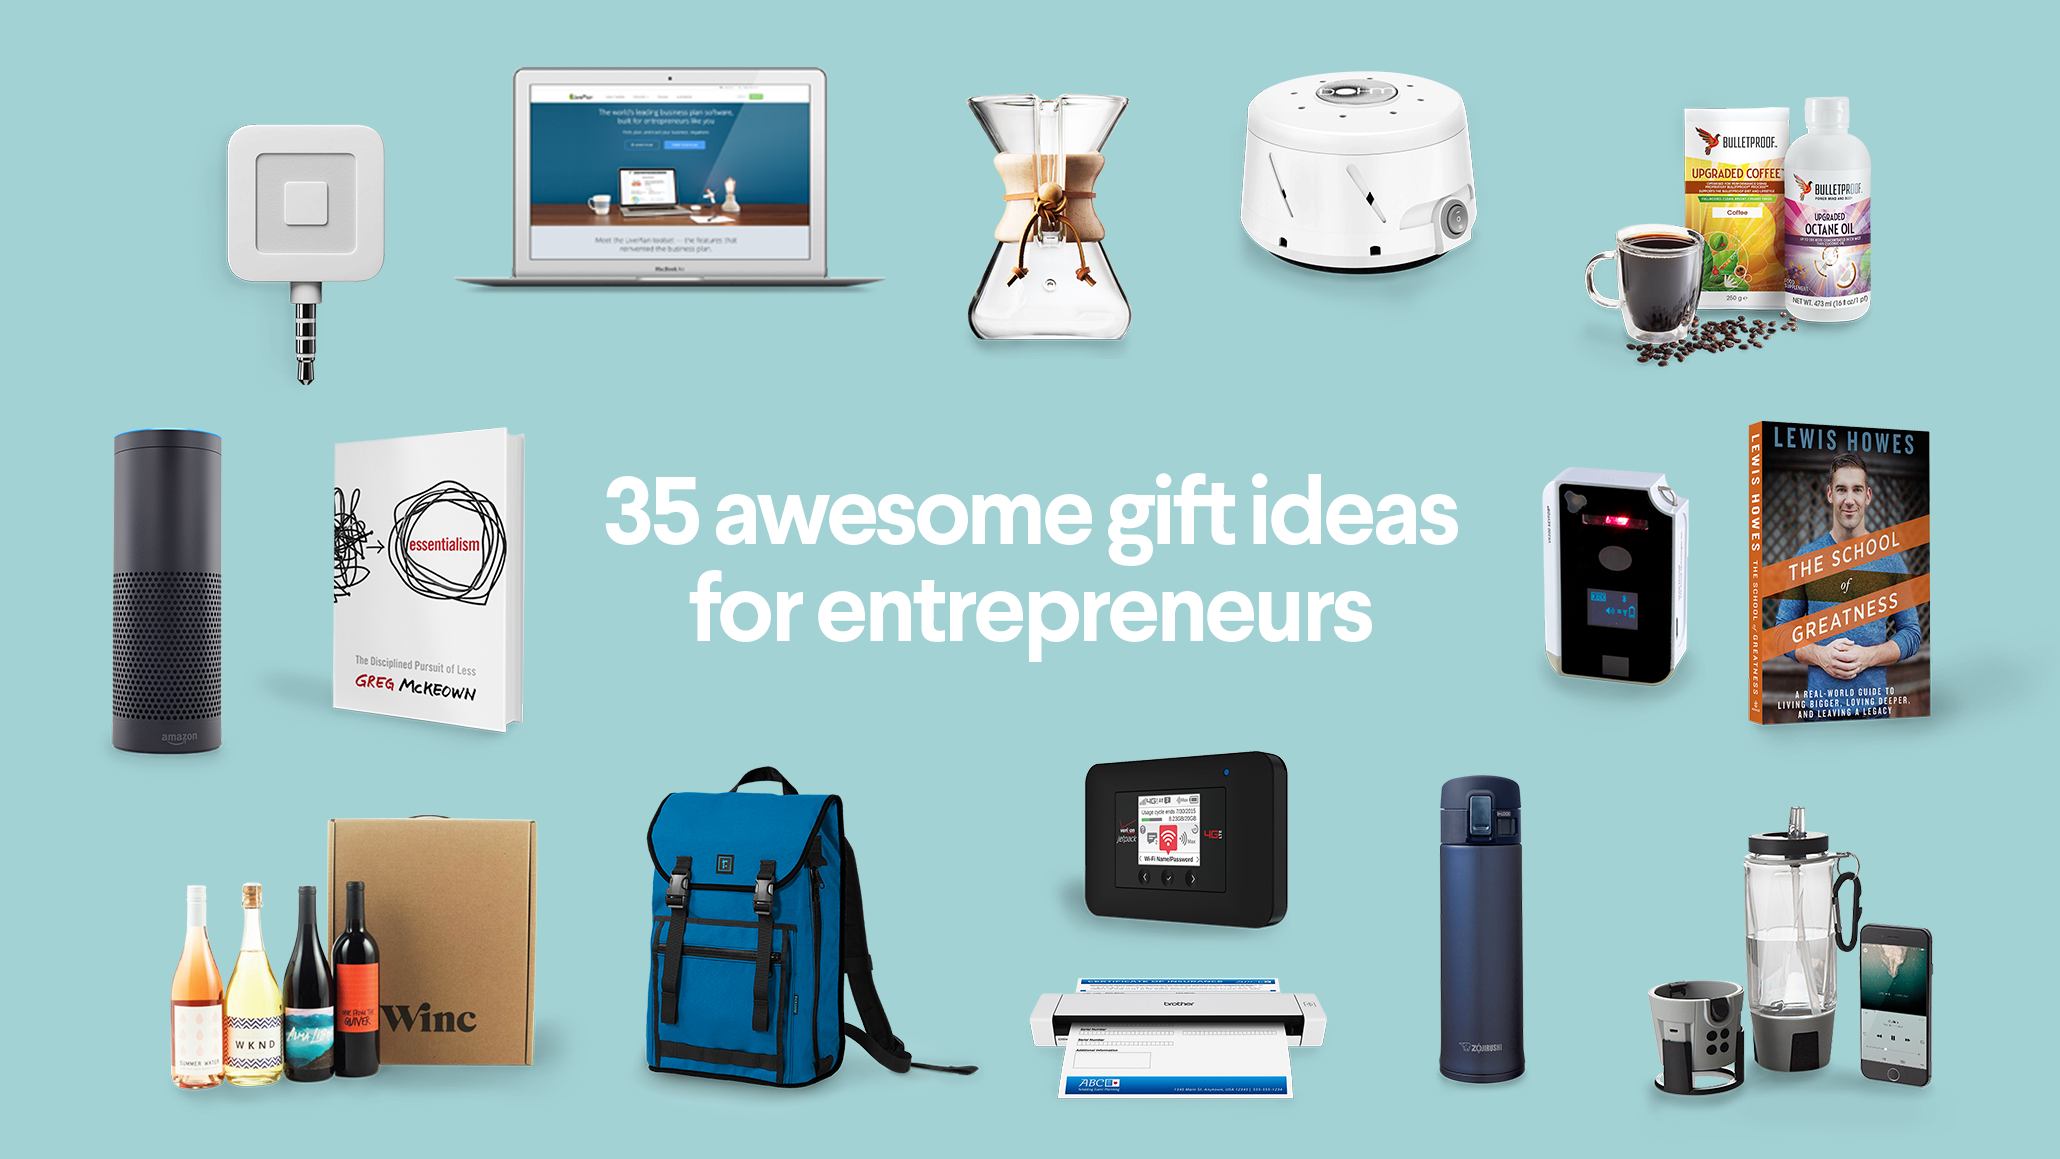 35 awesome gift ideas for entrepreneurs - 99designs